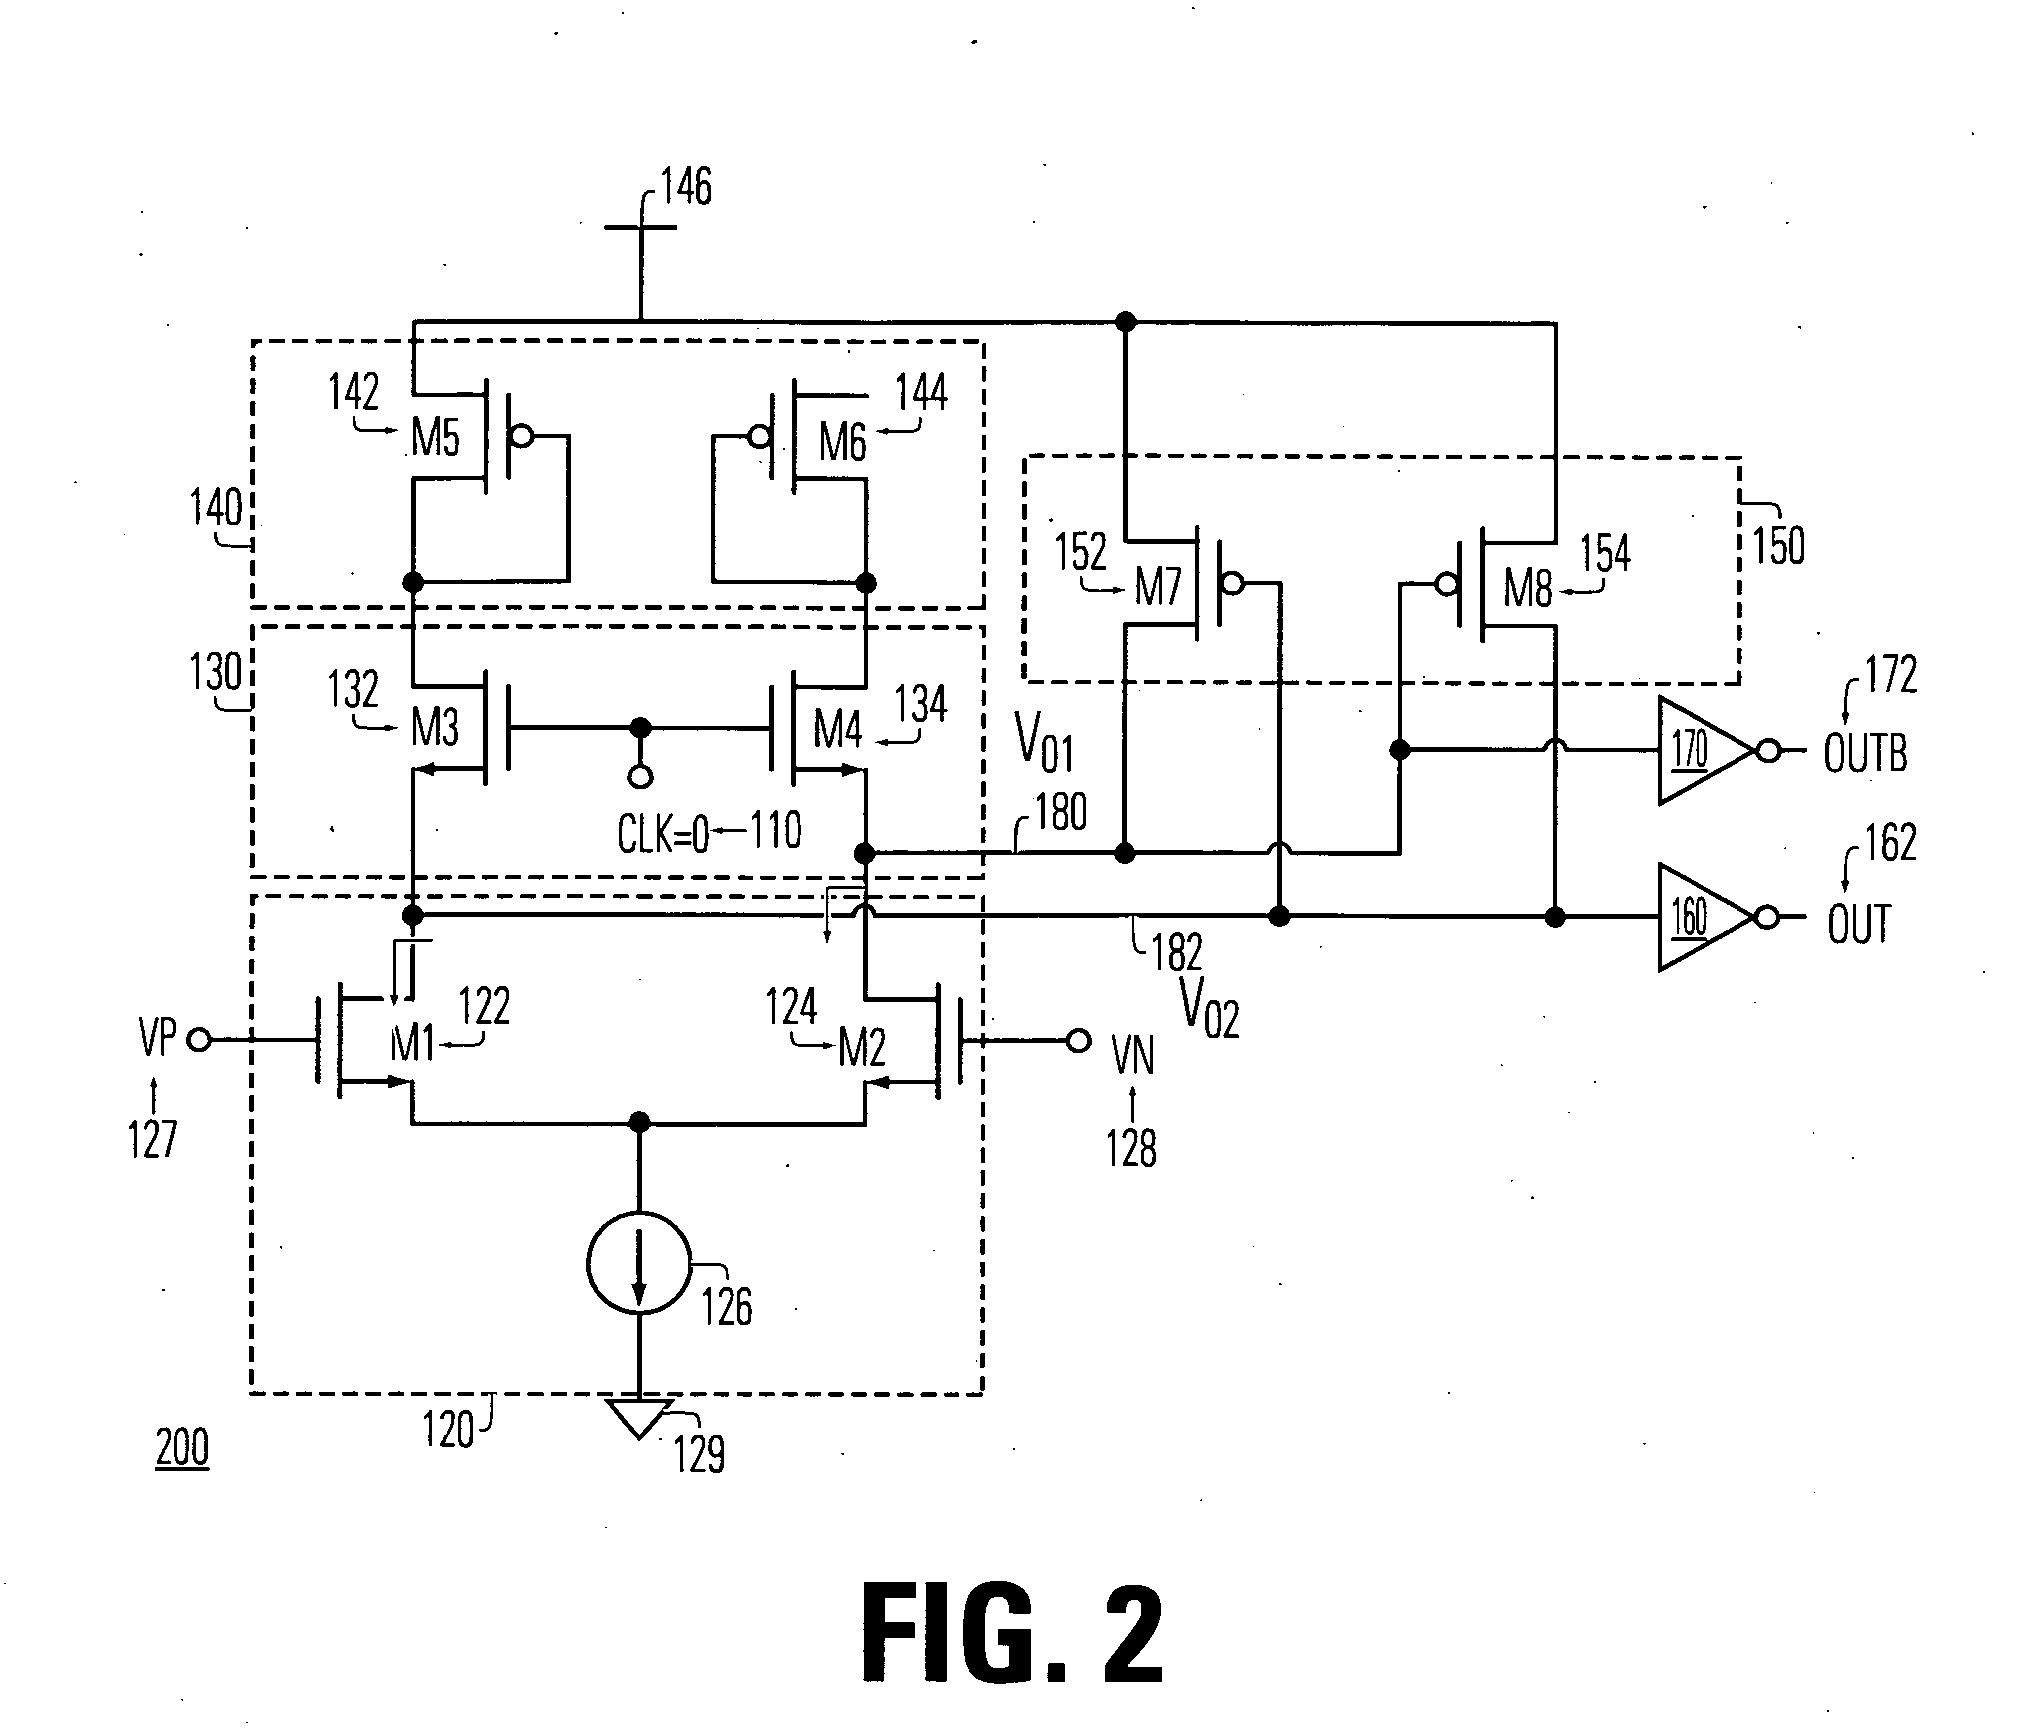 Differential sense amplifier circuit and method triggered by a clock signal through a switch circuit